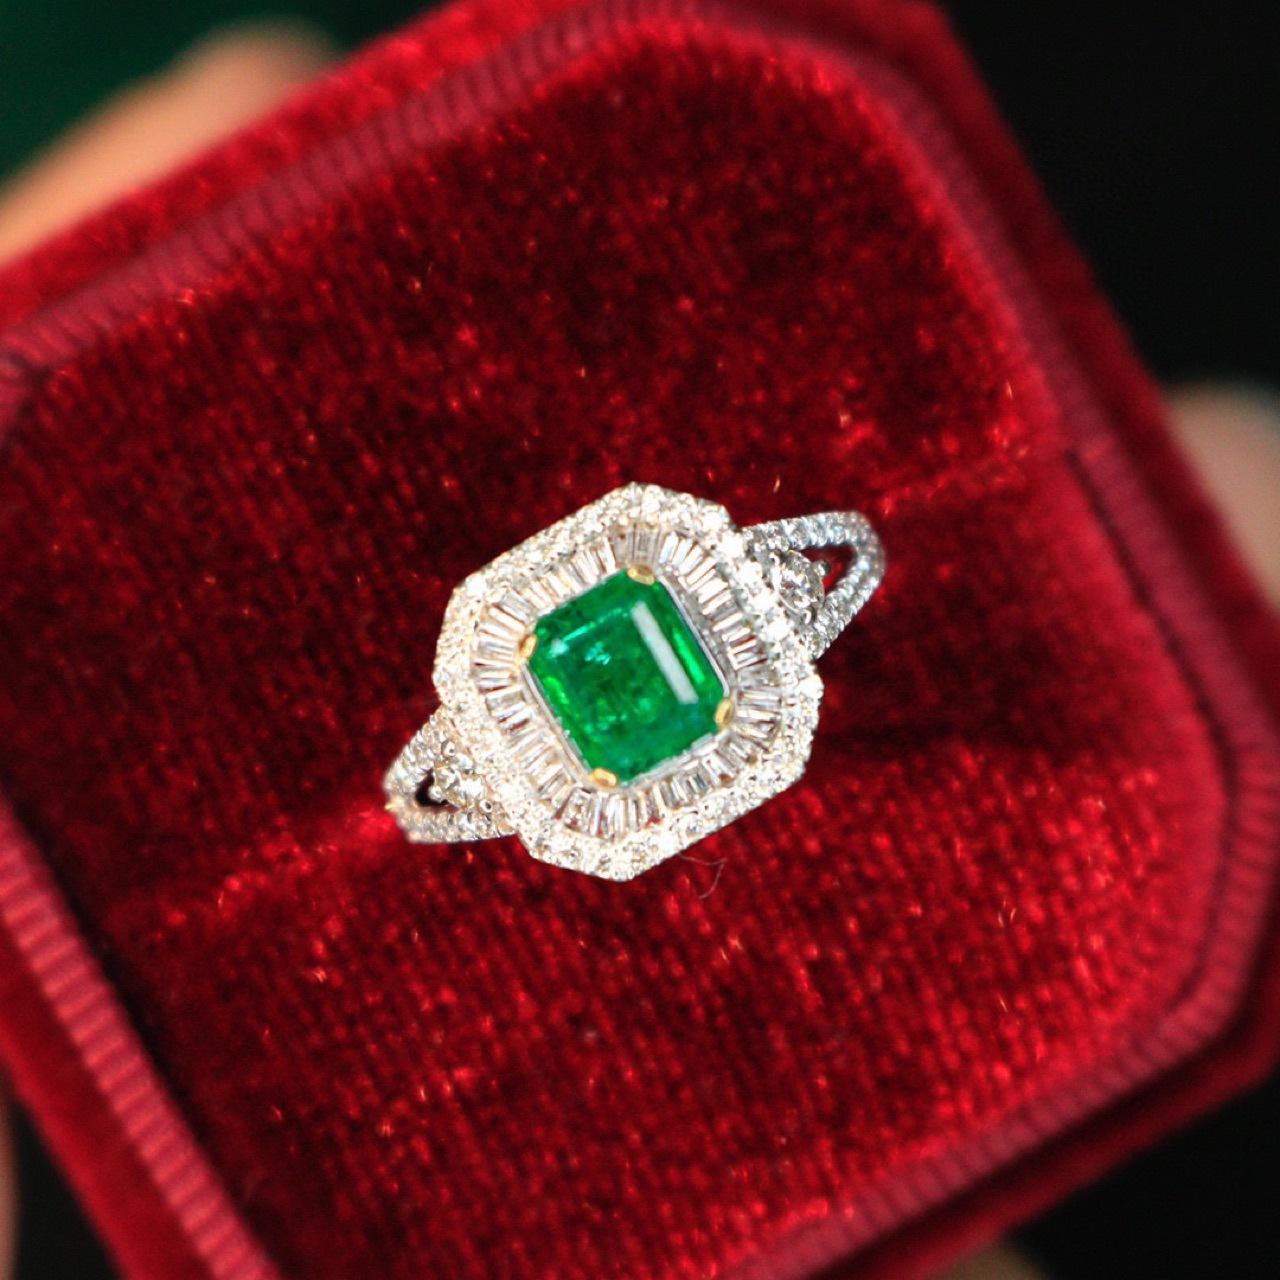 Emerald 0.67 Ct  Diamond 0.70CT
Color Vivid Green (Muzo Green)

Precious Metal Condition
18K white gold

Certificate of authenticity
Appraisal certificate 
color
18k Yellow Gold Emerald and Diamond Ring
purity
AU750
diamond